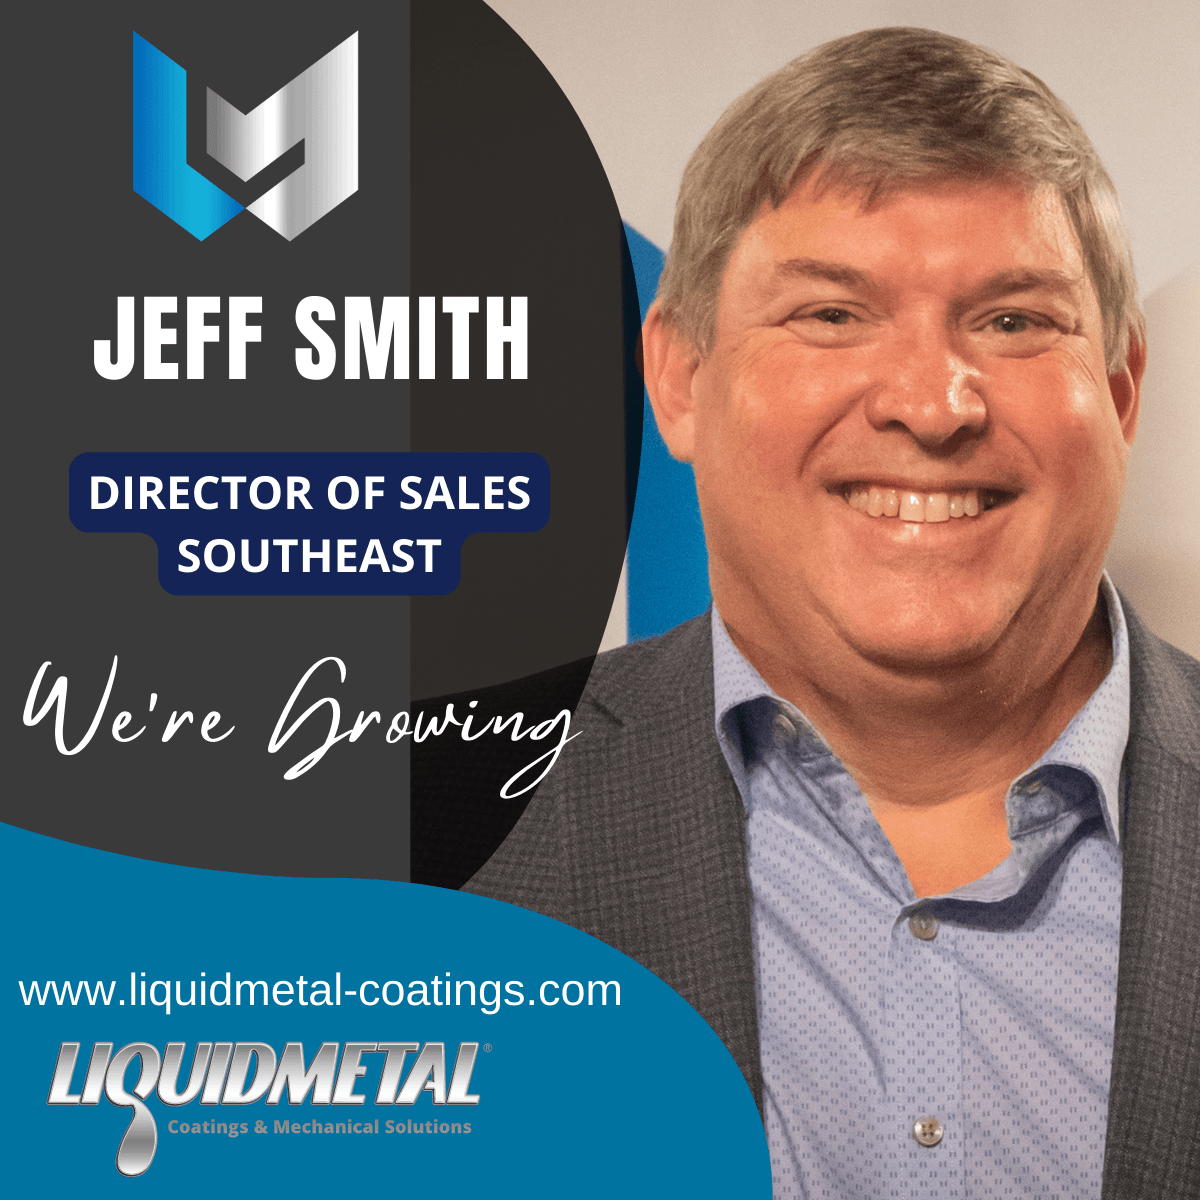 Jeff Smith Director of Sales in Southeast